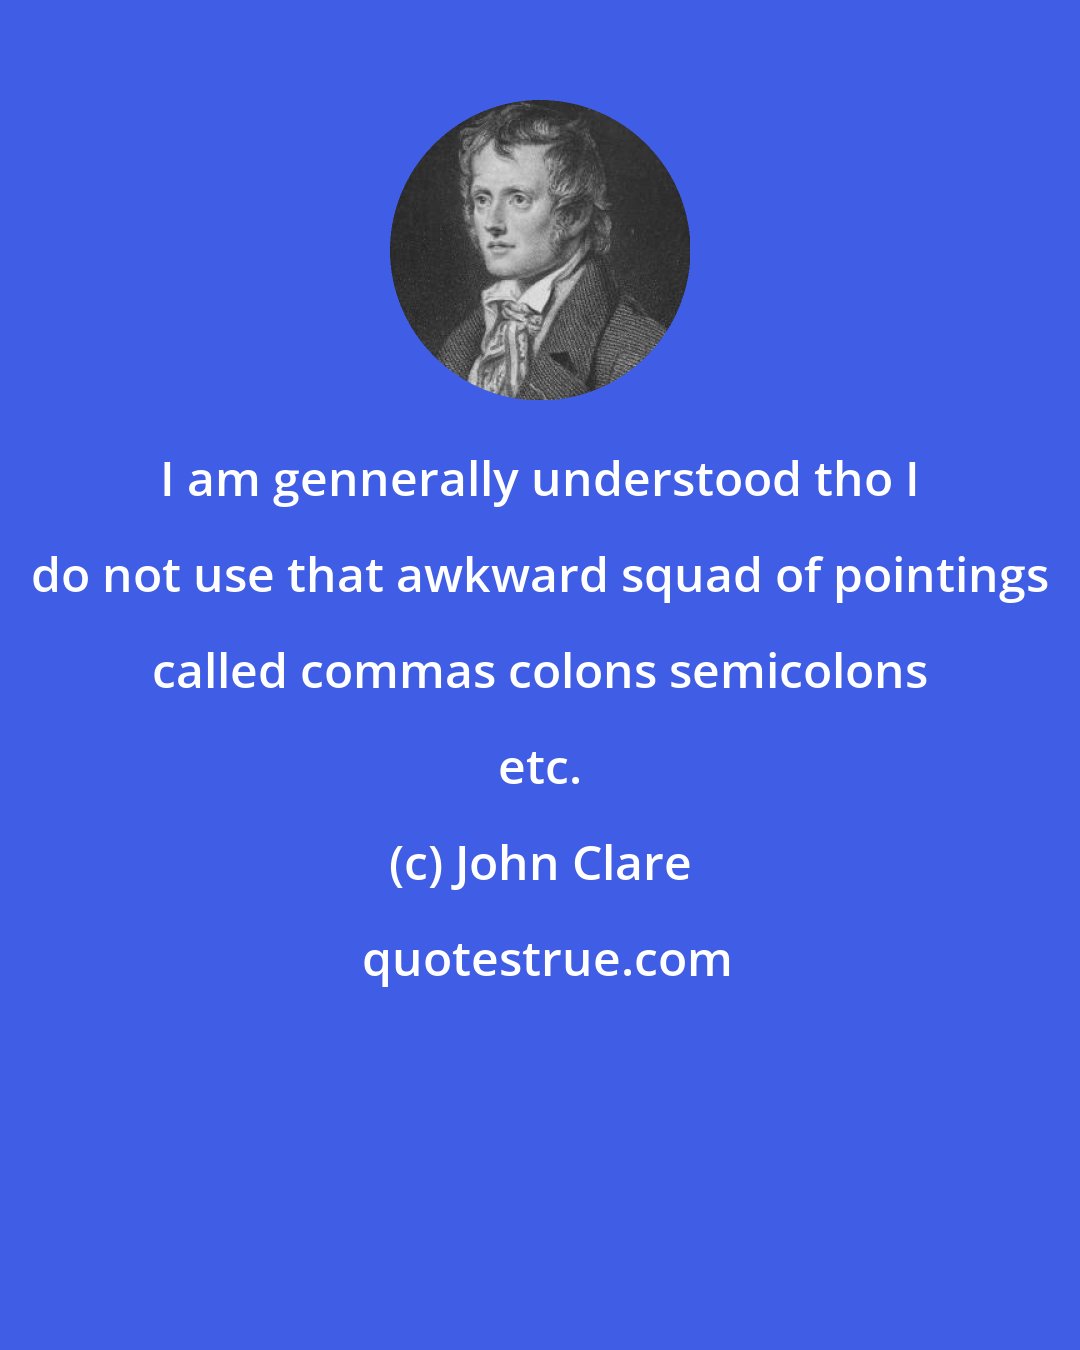 John Clare: I am gennerally understood tho I do not use that awkward squad of pointings called commas colons semicolons etc.